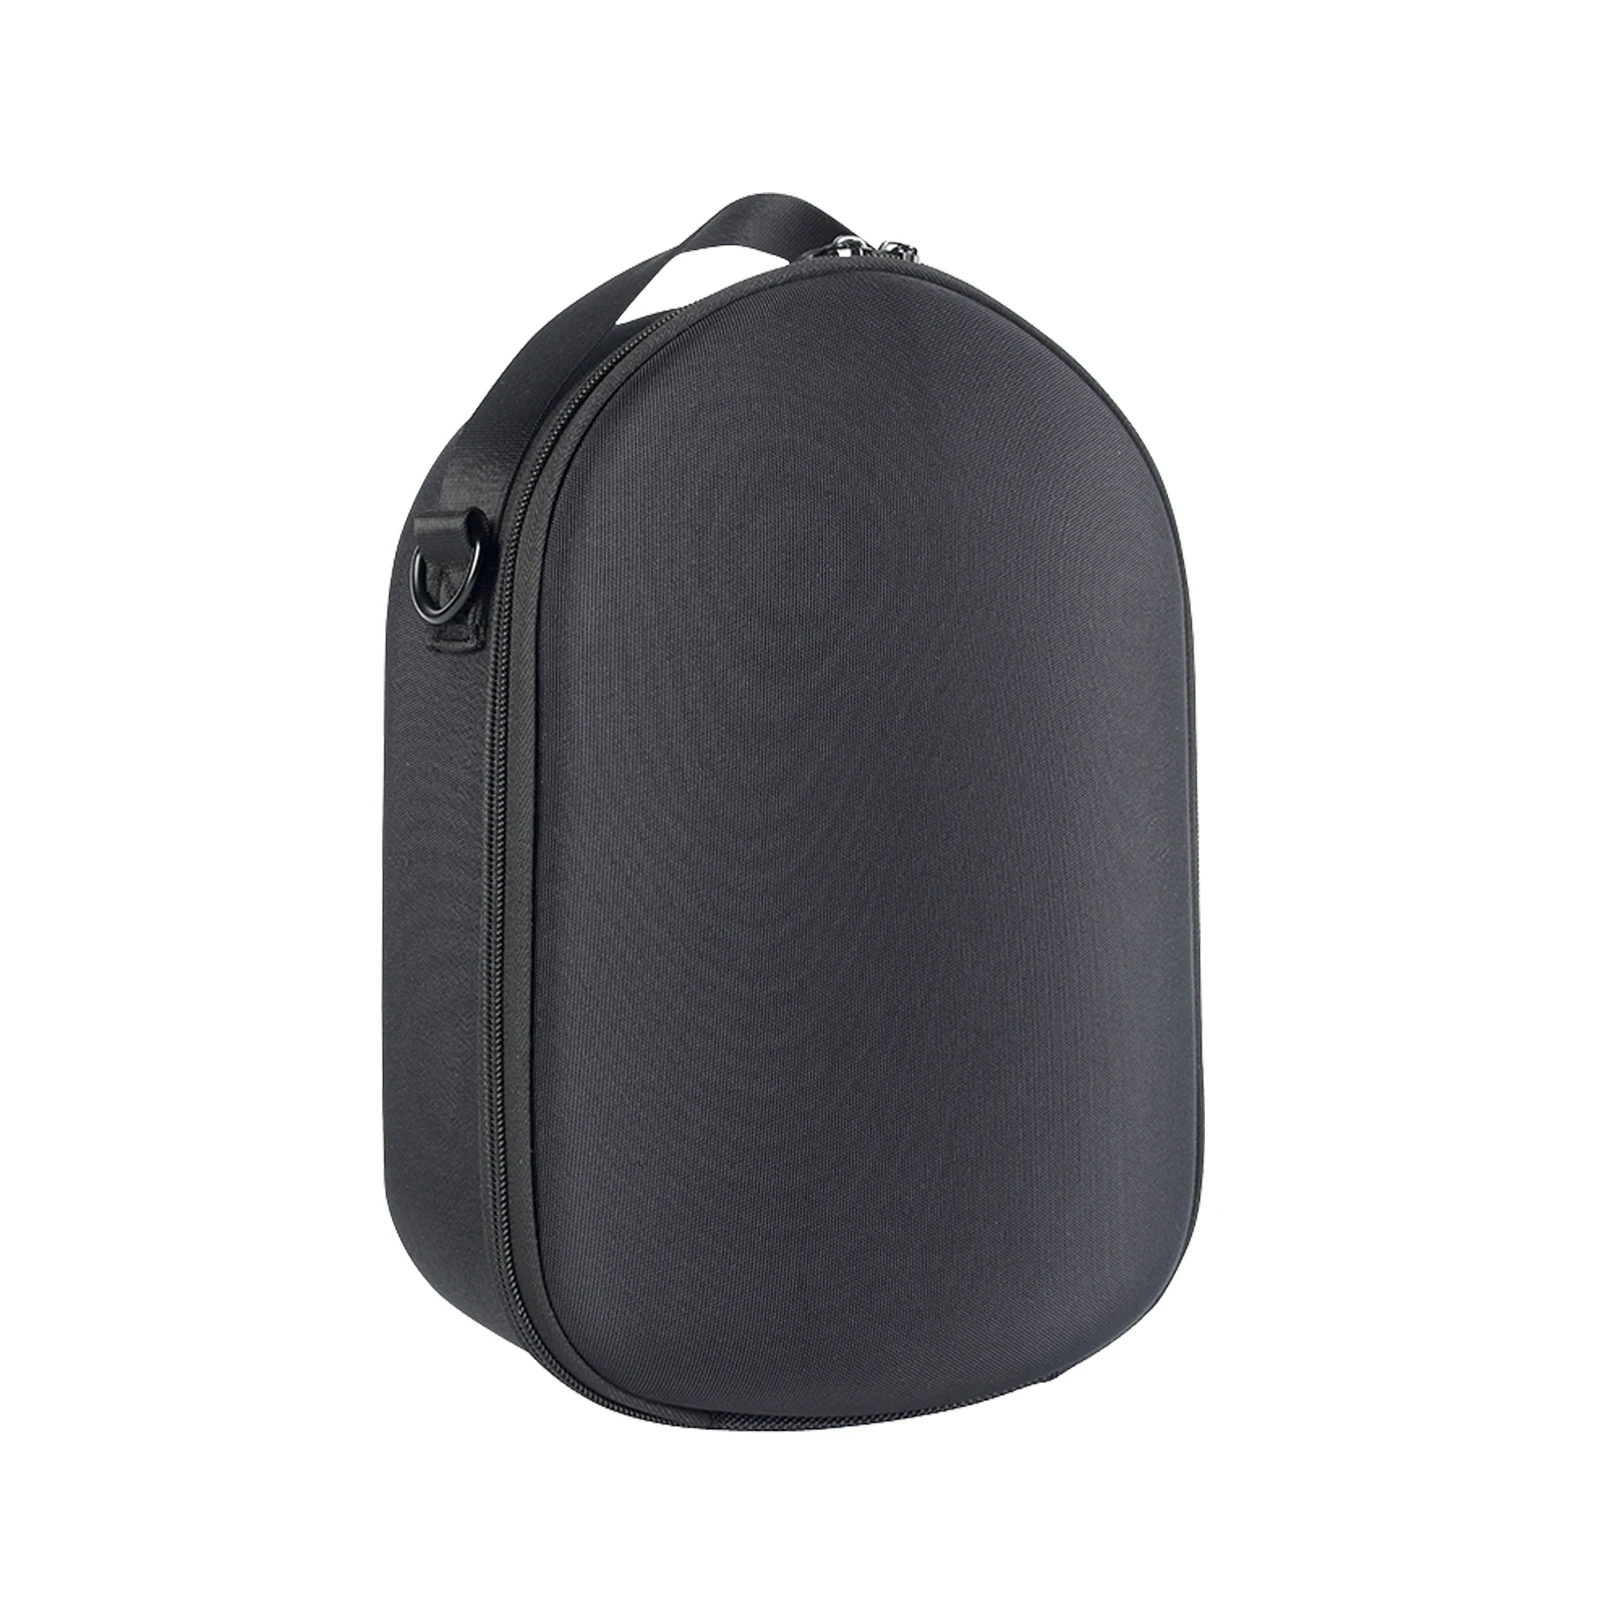 

Travel Carrying Case For Pico Neo 3 VR Glasses Headset Controller Shockproof Storage Bag For Pico Neo 3 Accessories